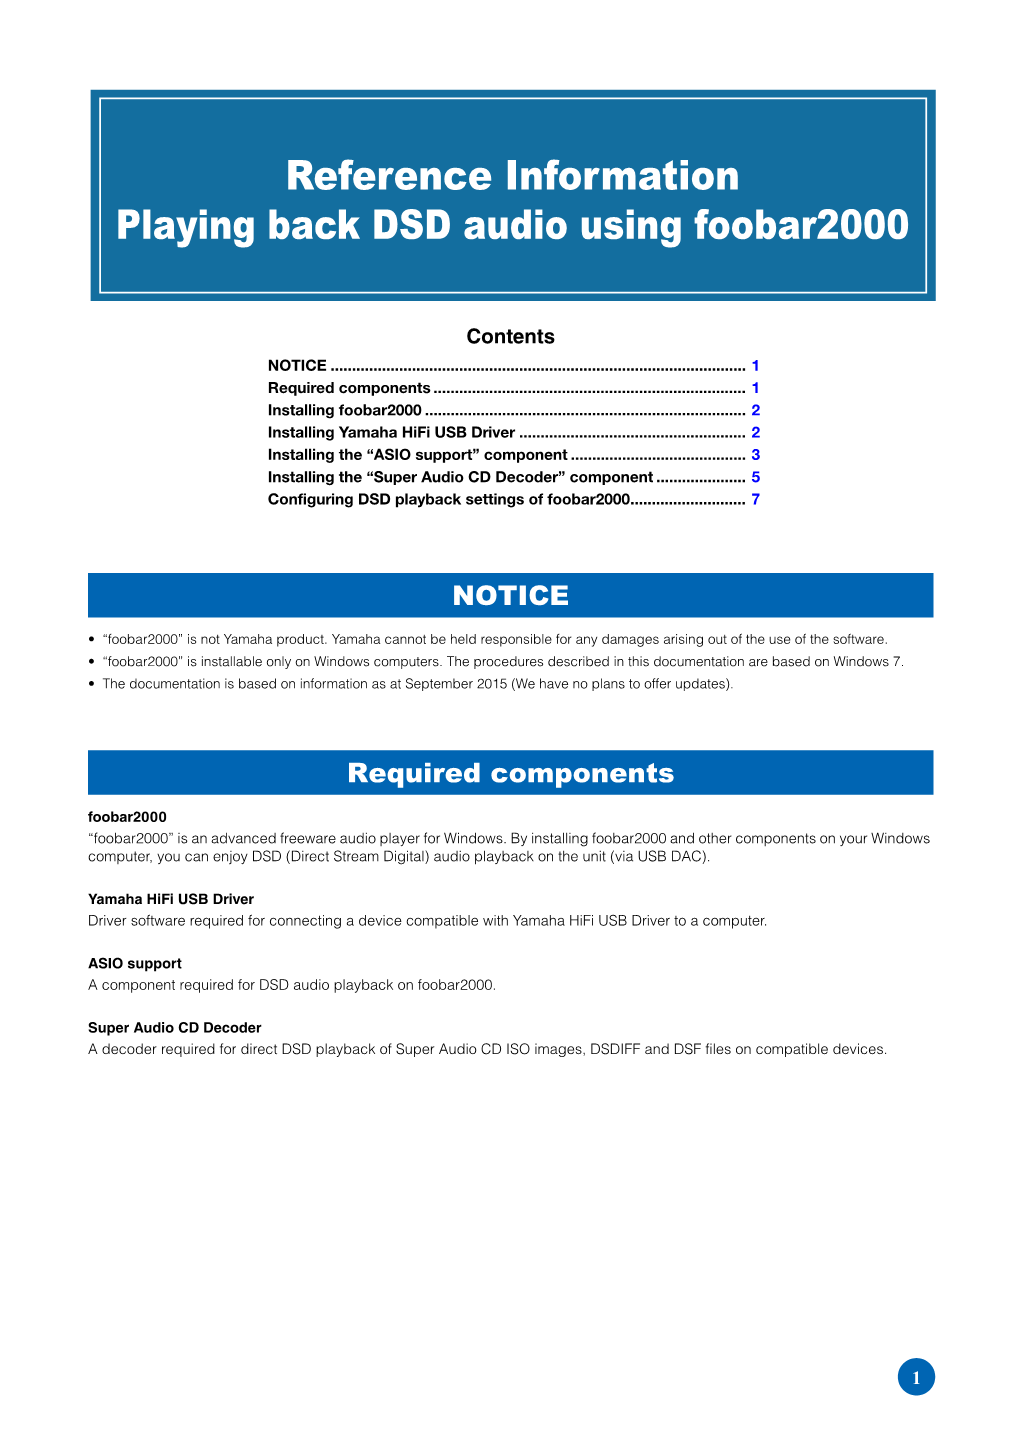 Reference Information Playing Back DSD Audio Using Foobar2000